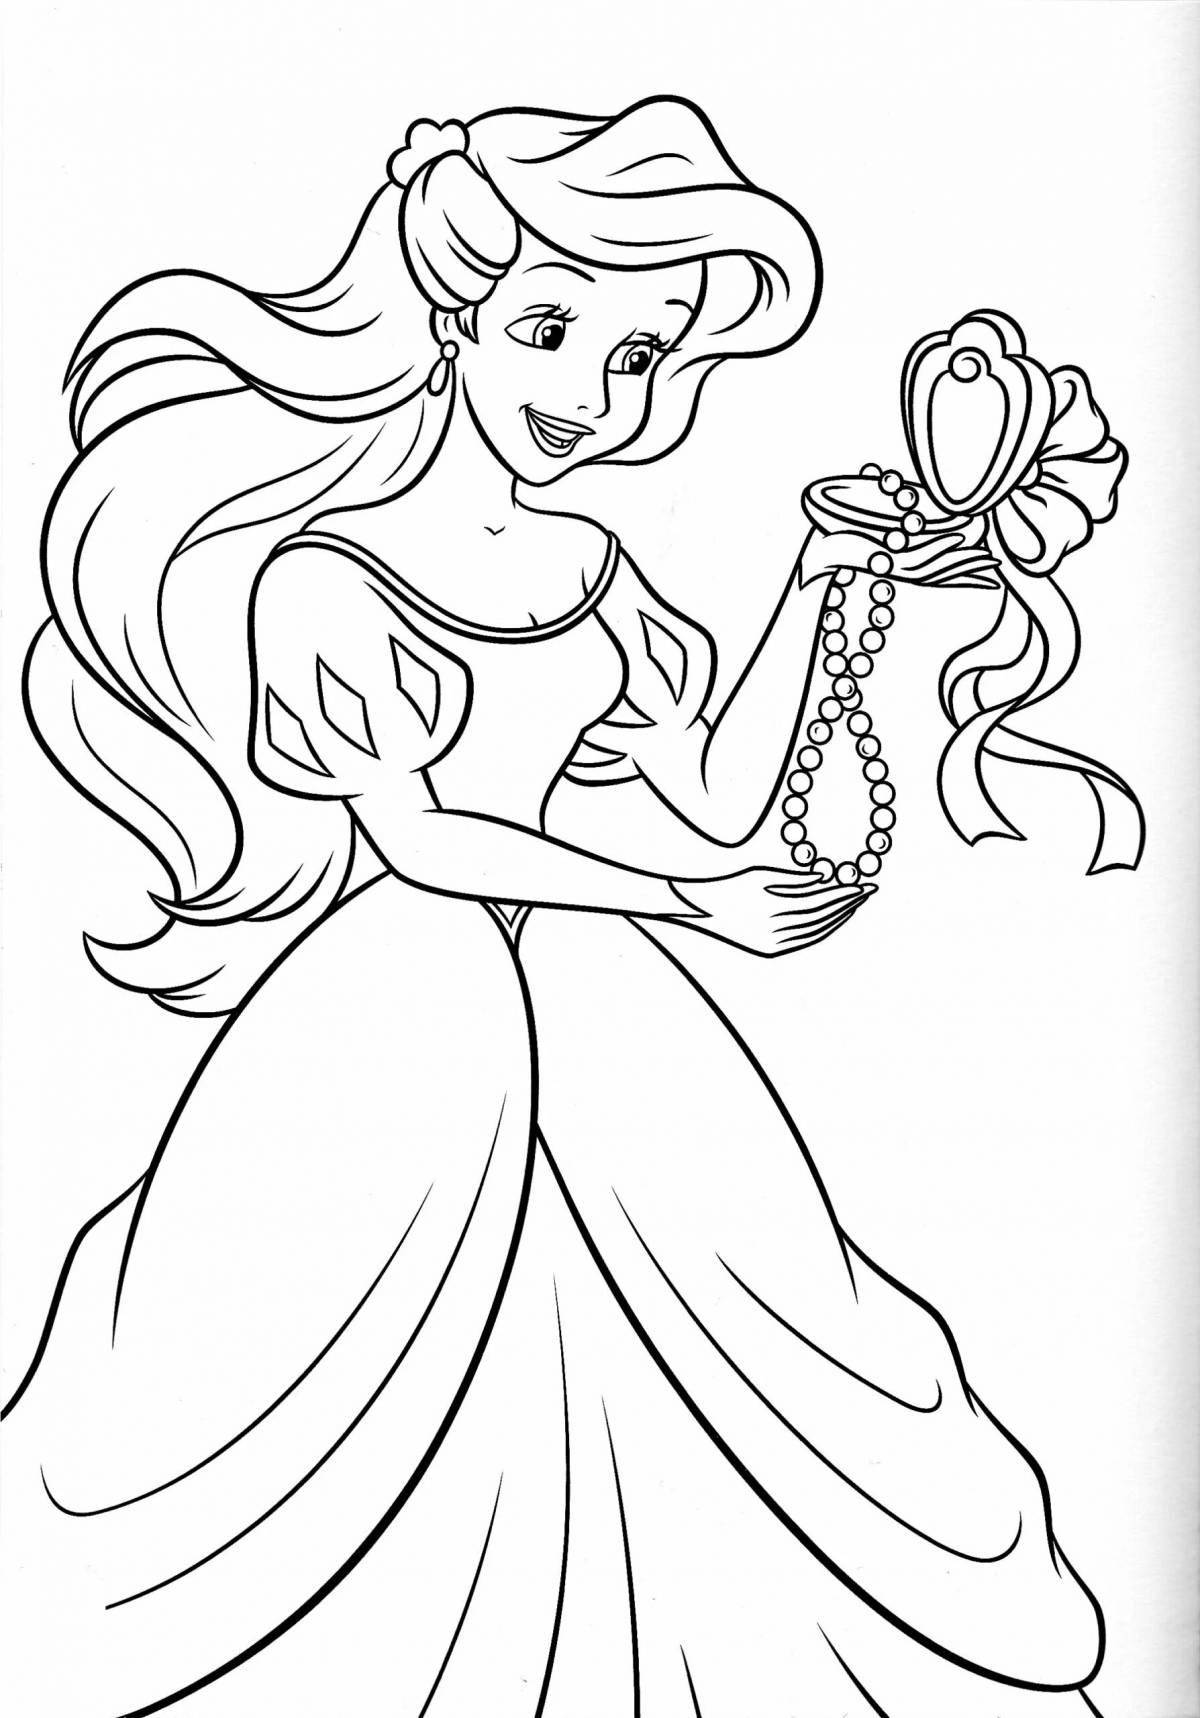 Charming coloring book for girls princesses 5-6 years old